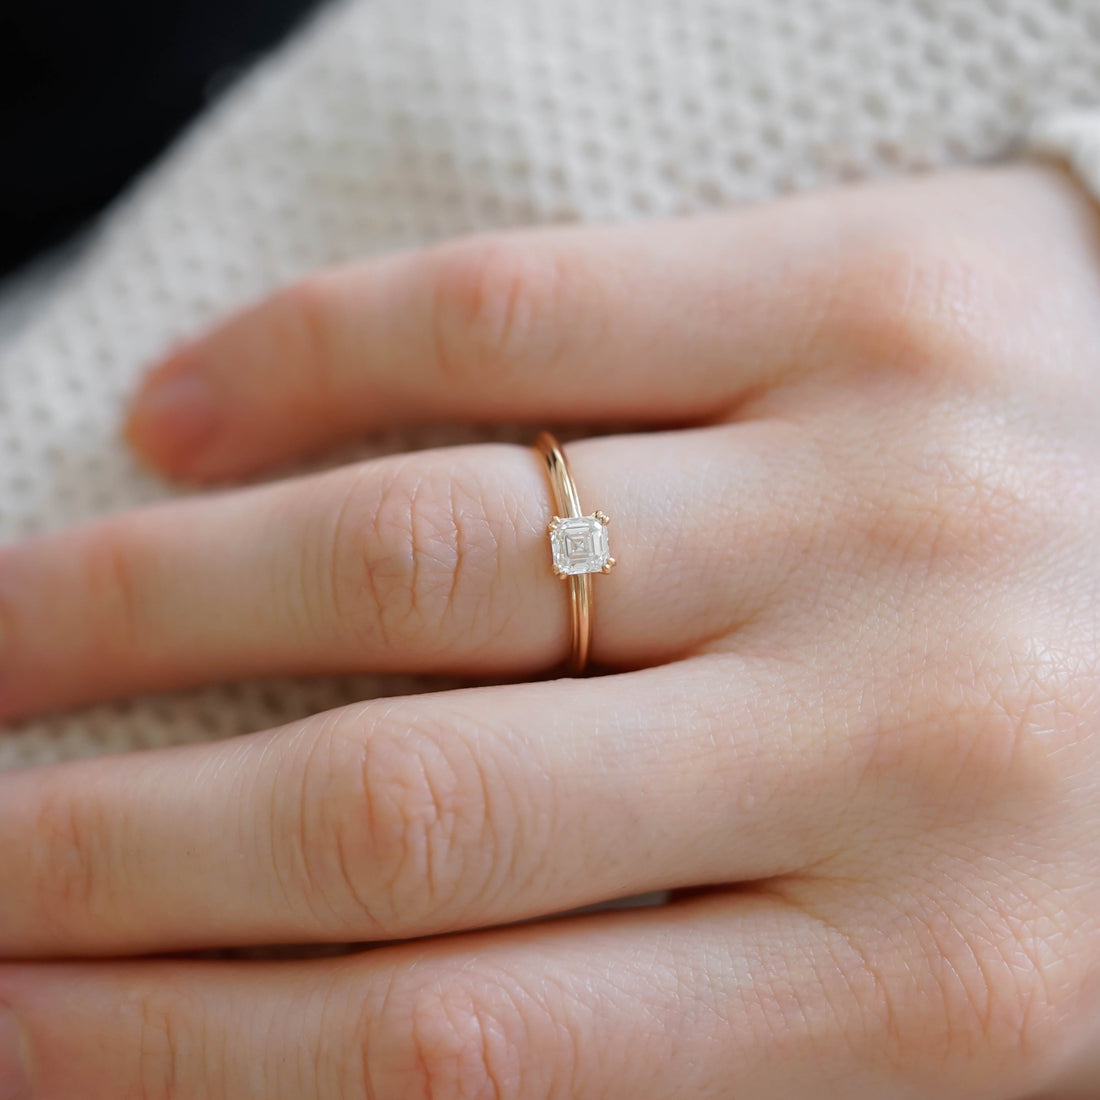 burcu-okut-jewellery-jewelry-natural-diamond-engagement-ring-yalın-asscher-ring-woman-proposal-18K-solid-rose-gold-gift-unique-gia-certificate-elegant-timelessburcu-okut-jewellery-jewelry-natural-diamond-engagement-ring-yalın-asscher-ring-woman-proposal-18K-solid-rose-gold-gift-unique-gia-certificate-elegant-timeless